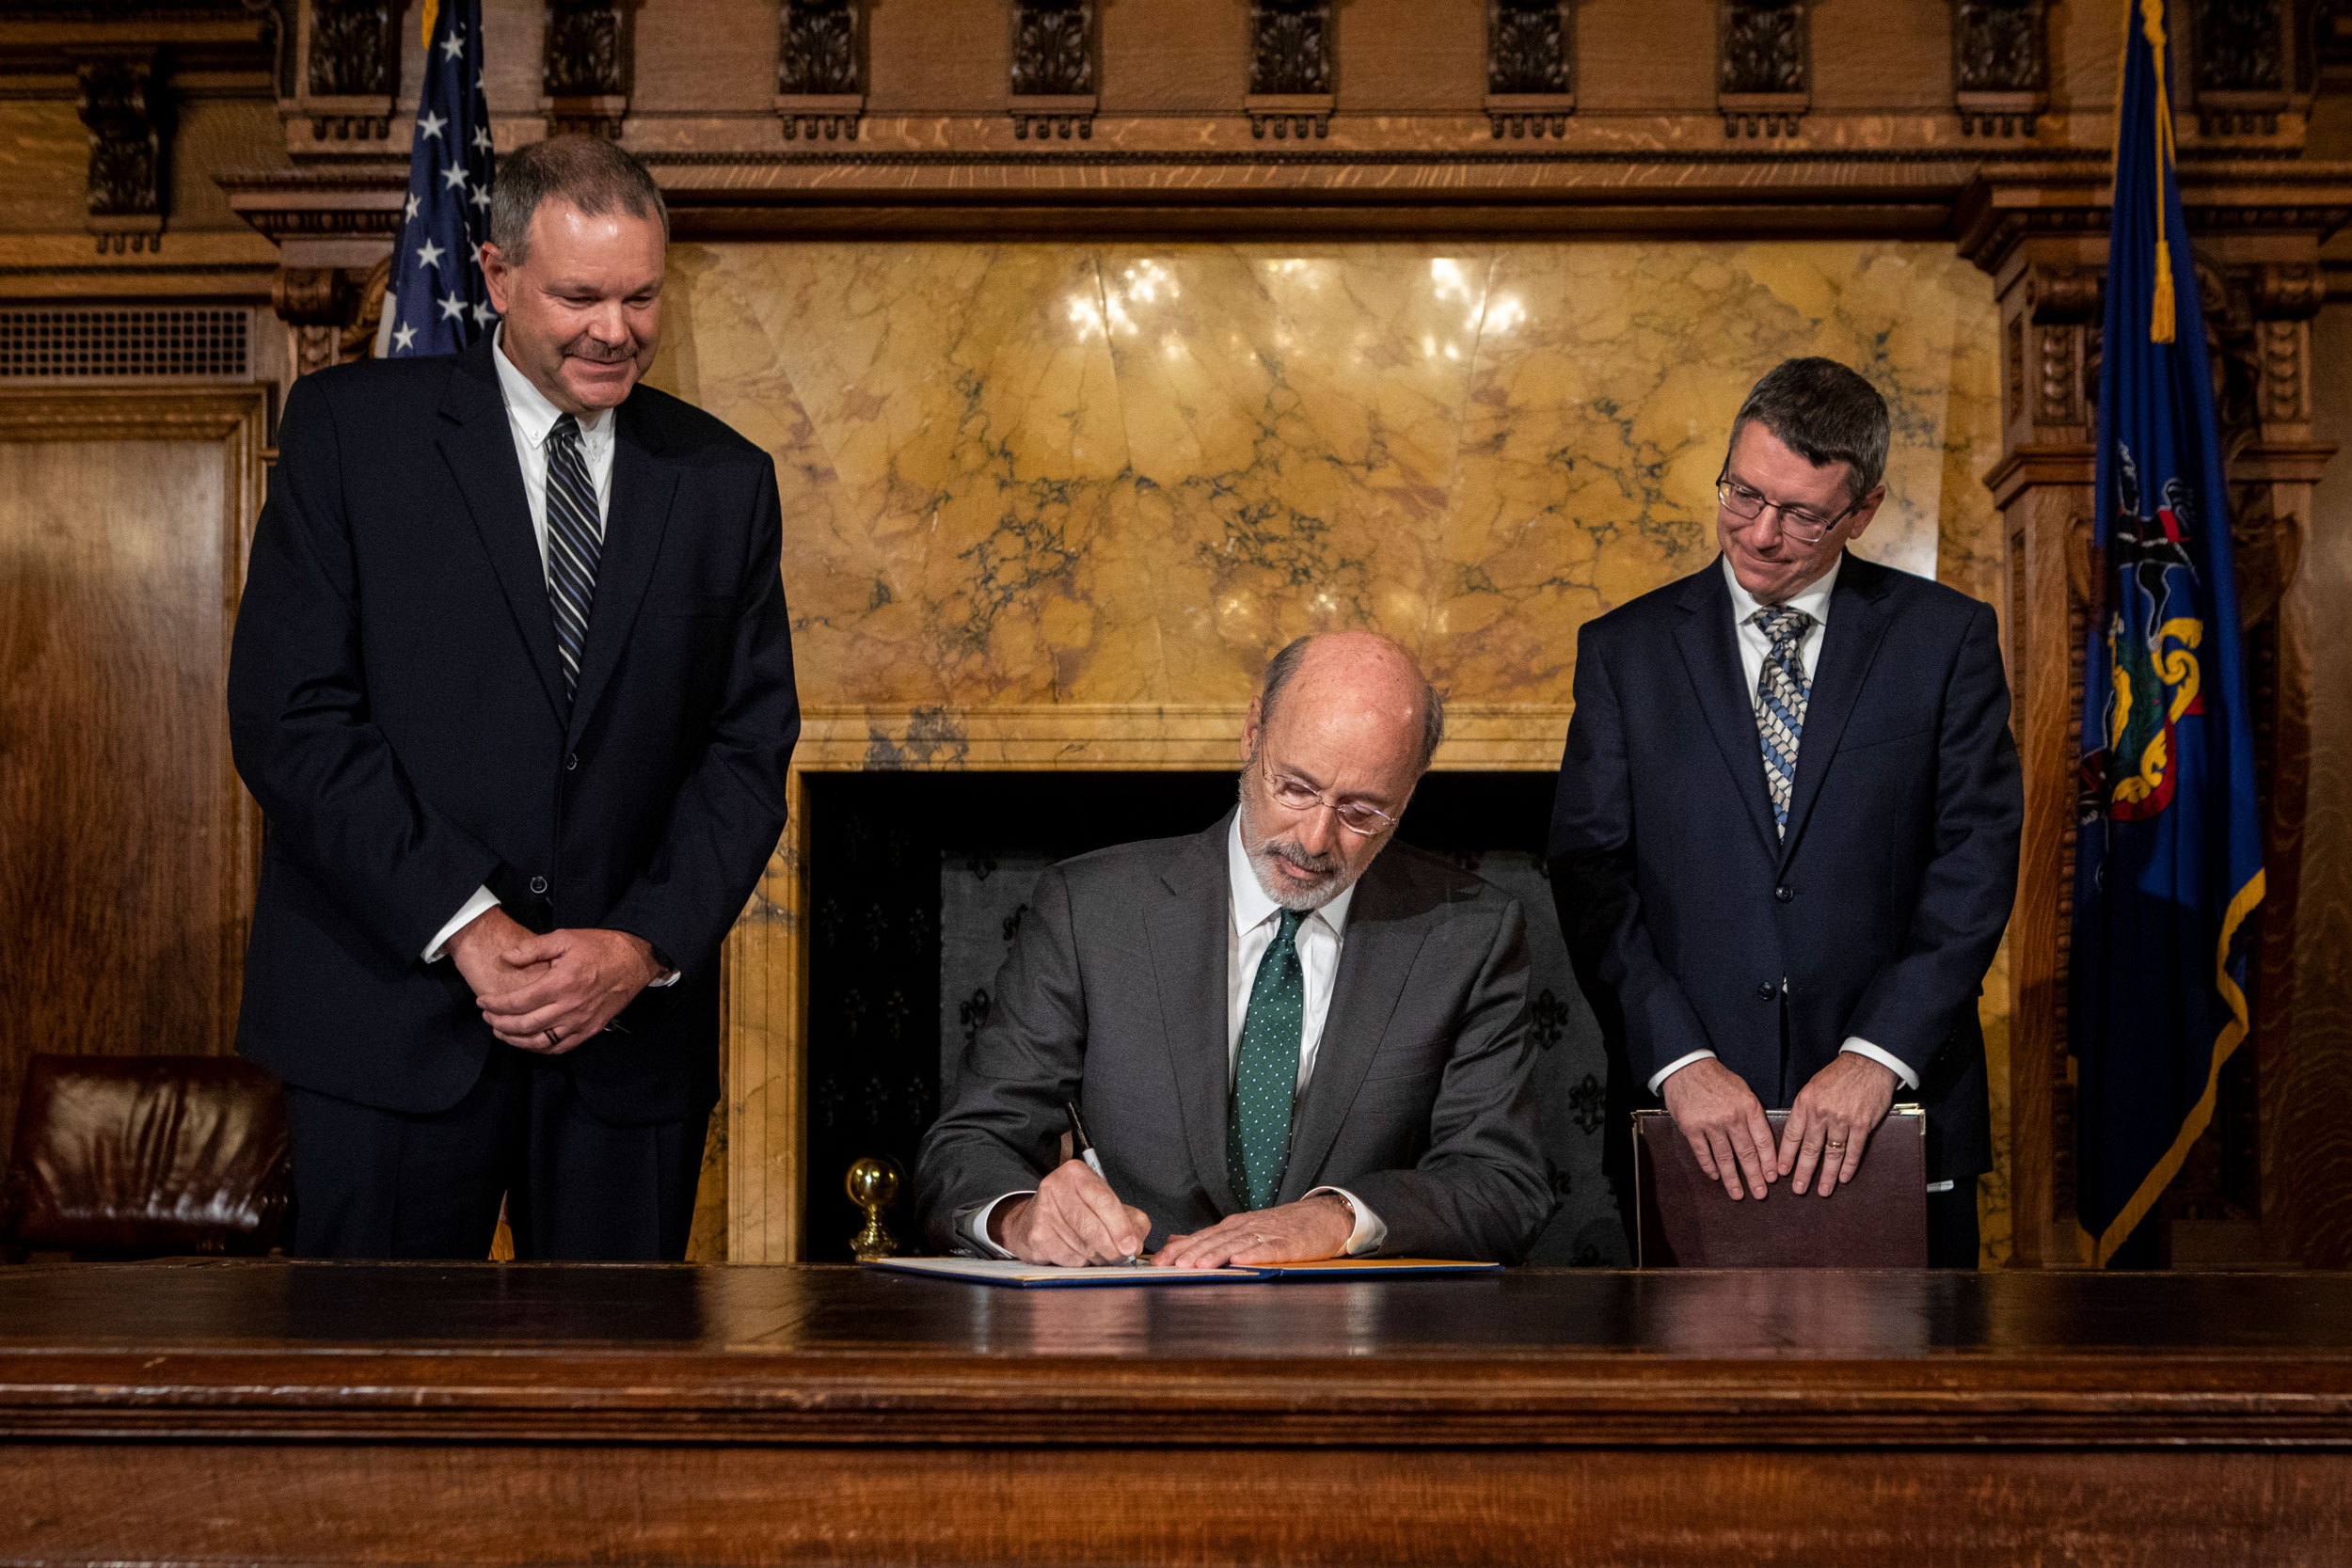 Former Gov. Tom Wolf initiated the state’s entrance into RGGI in 2019.